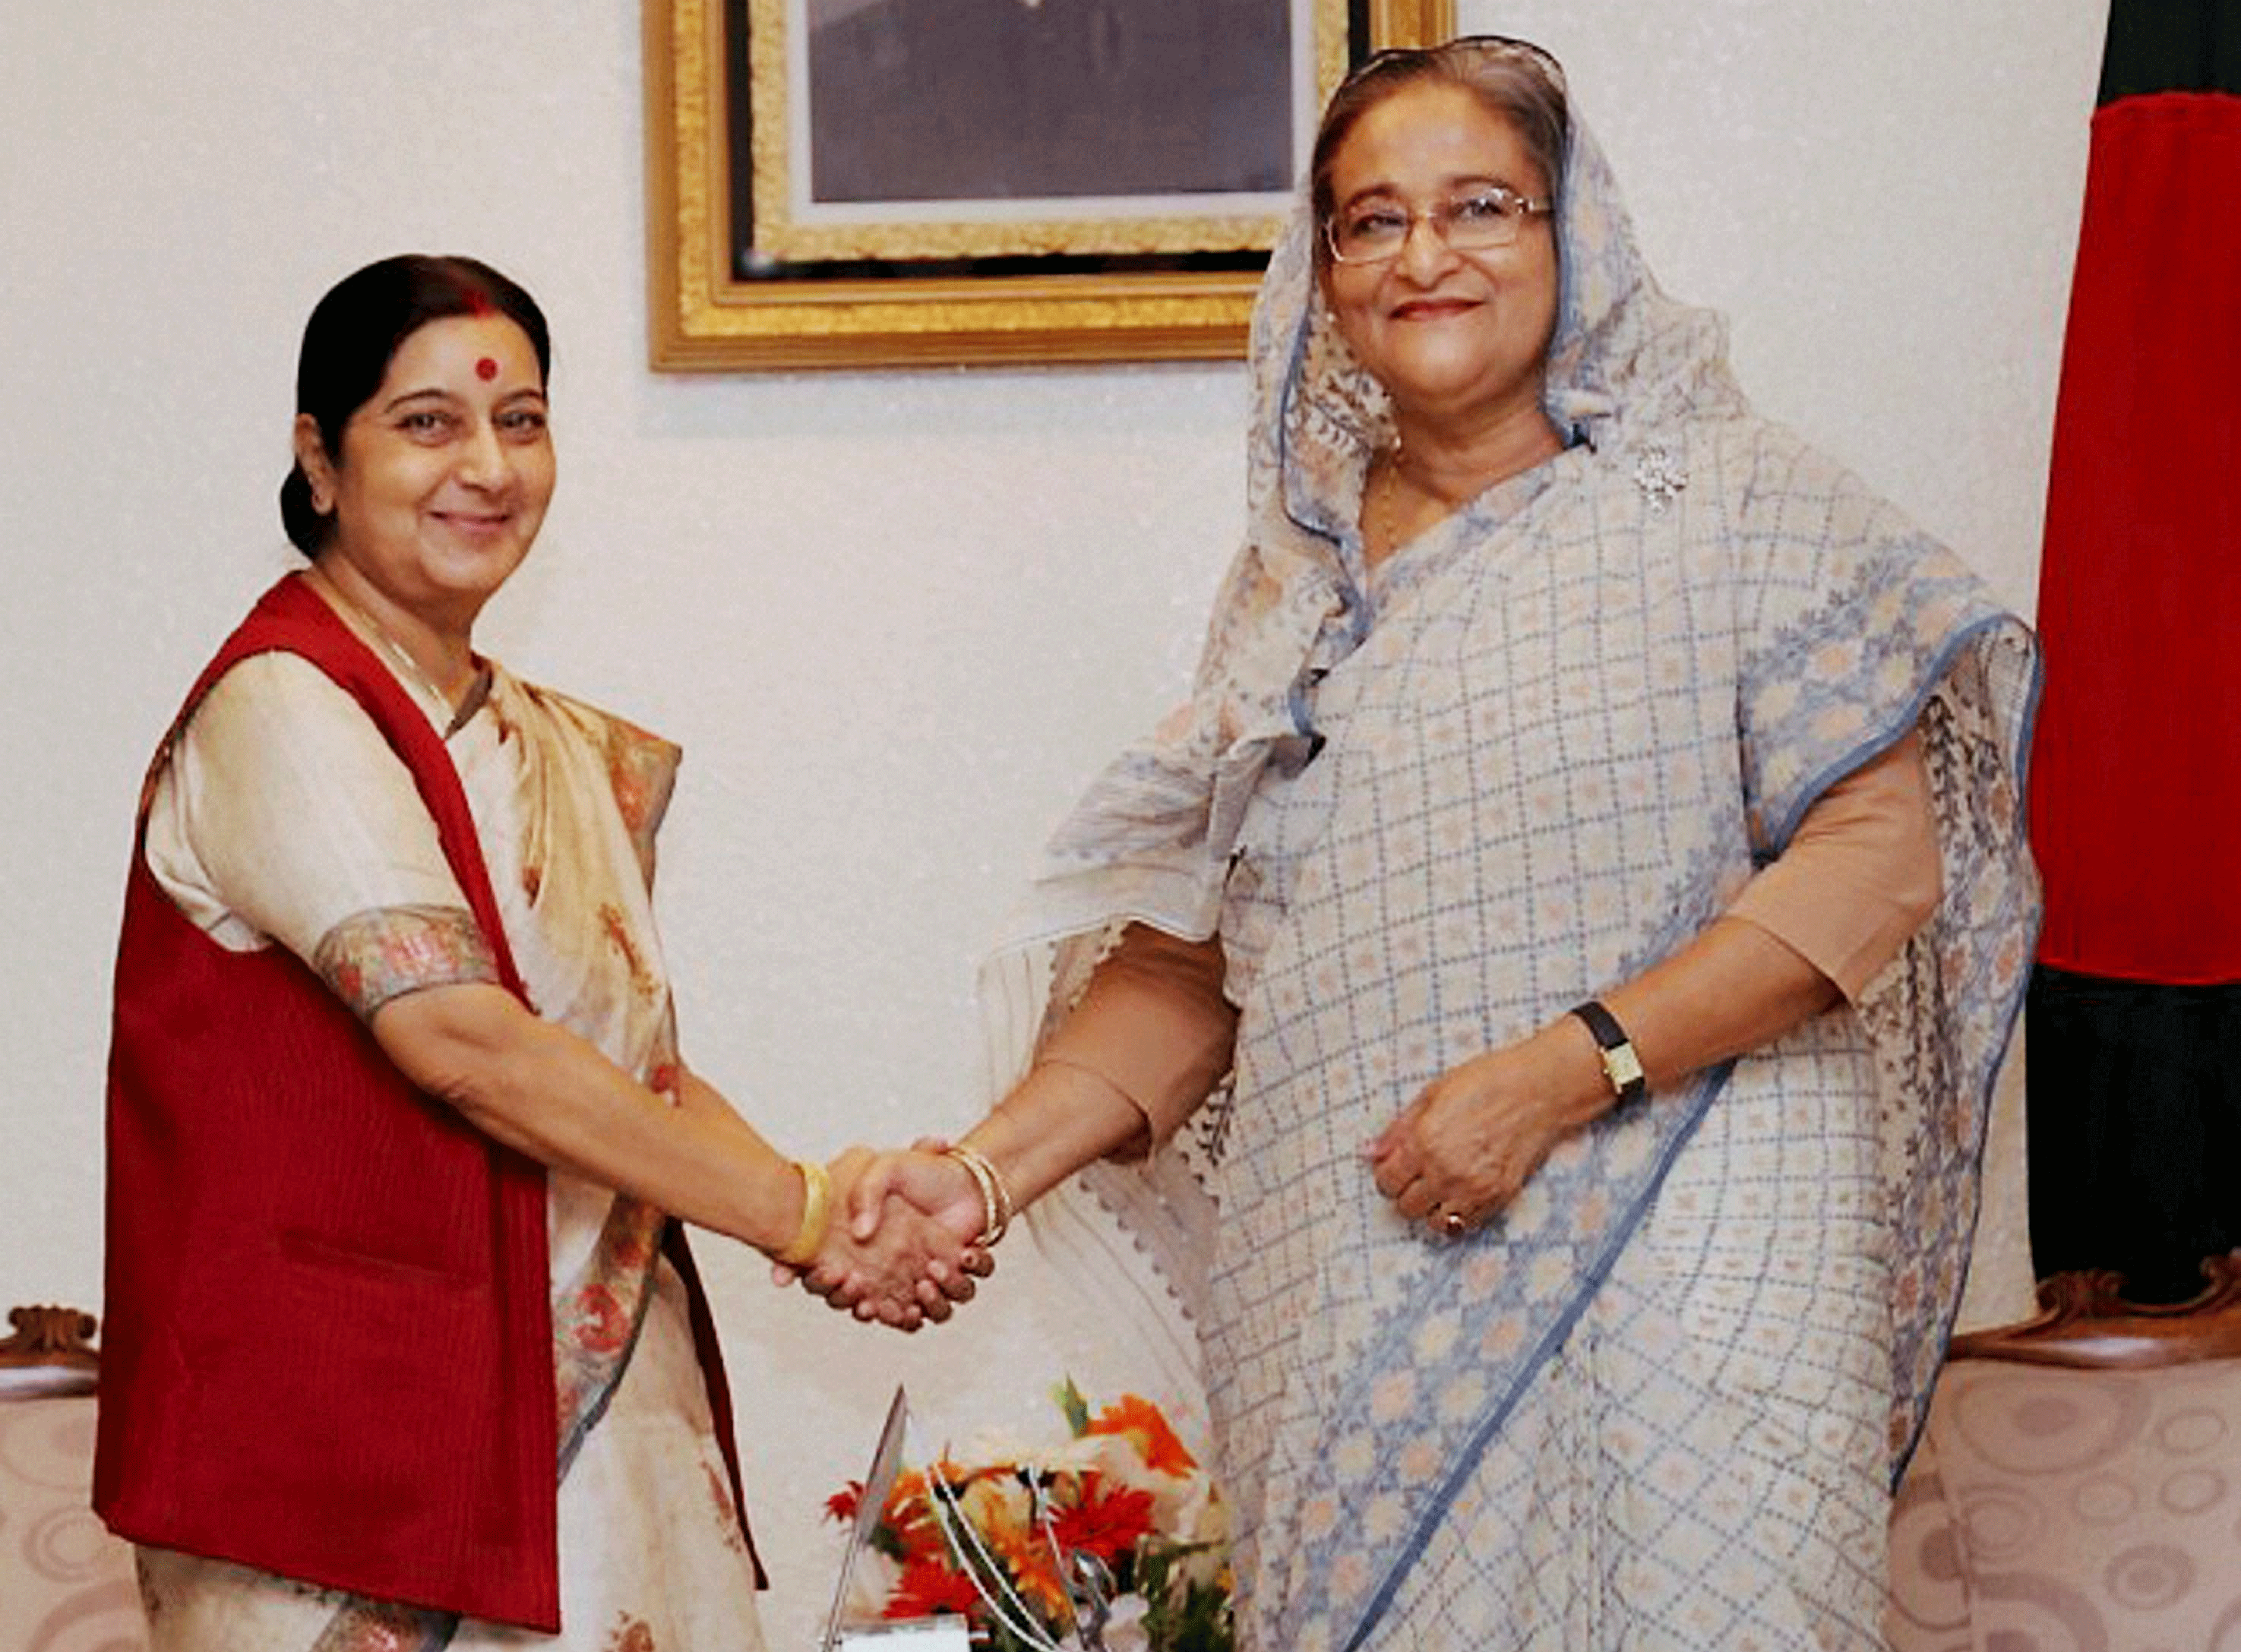 External Affairs Minister Sushma Swaraj today held talks with her Bangladeshi counterpart Abul Hassan Mahmood Ali on key bilateral issues, including Land Boundary Agreement and proposed Teesta river water sharing deal, during which the Indian side also raised the matter of illegal immigration. AP file photo